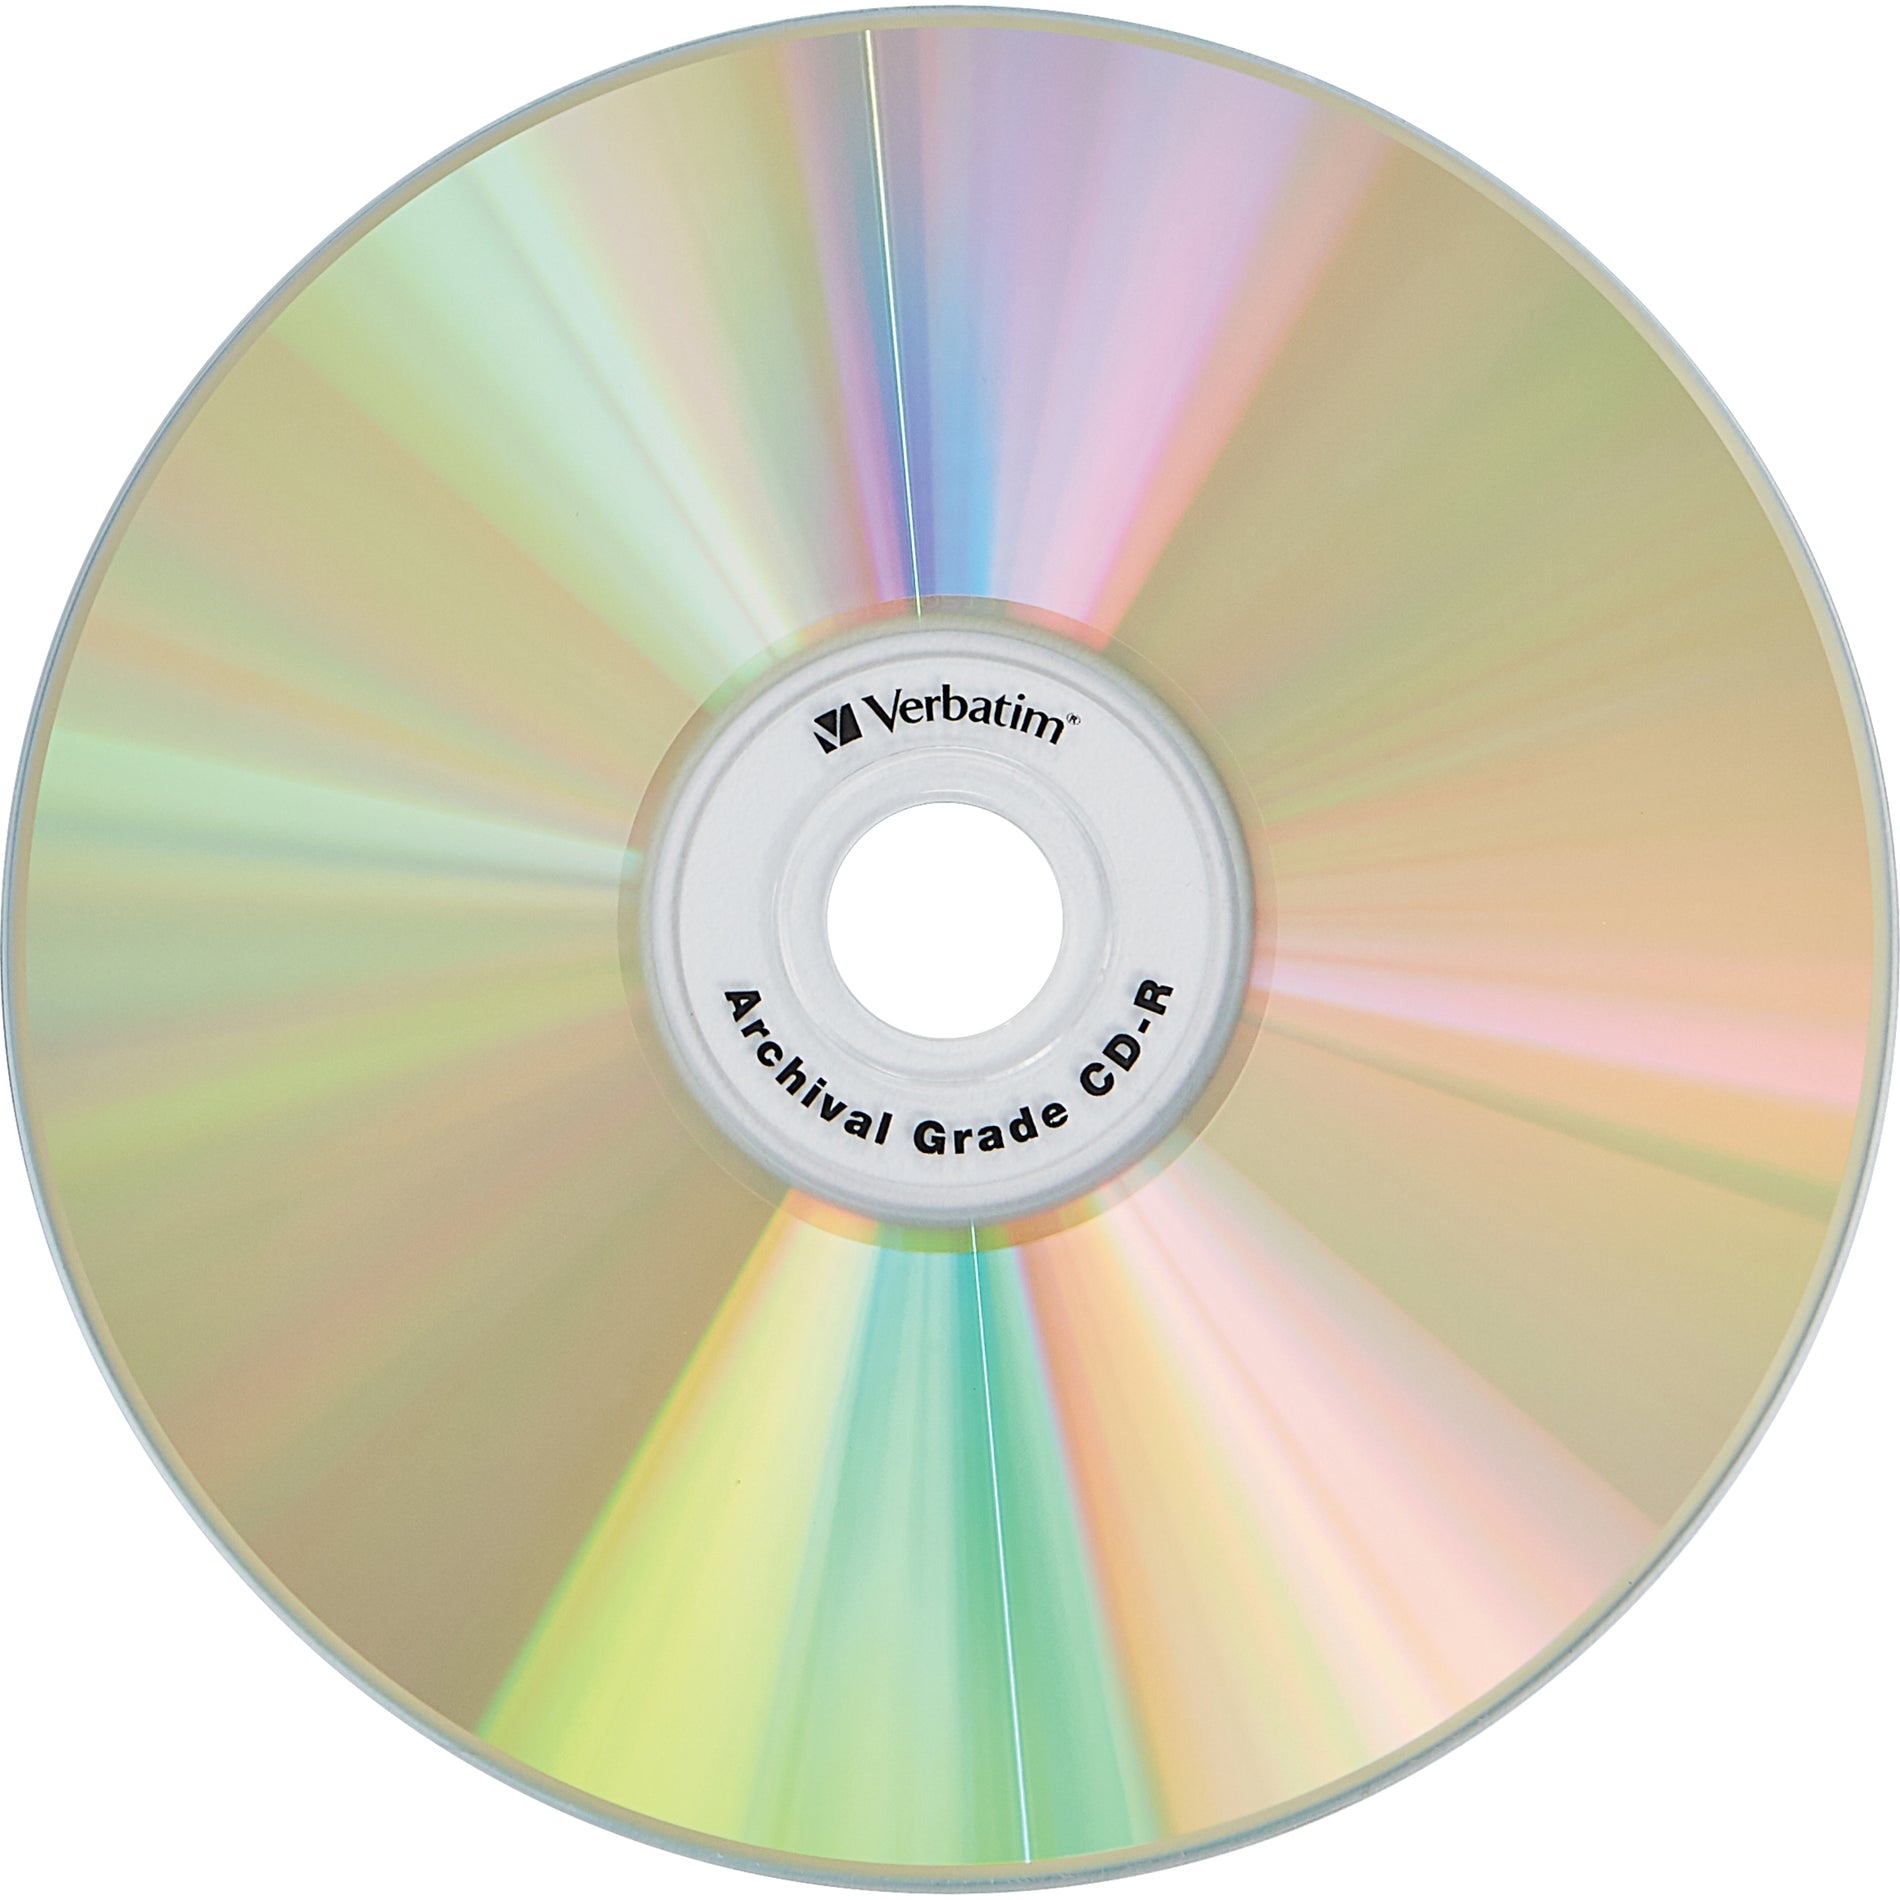 Verbatim 96159 UltraLife CD-R 700MB 52X UltraLife Gold Archival Grade with Branded Surface, 50 Pack Spindle